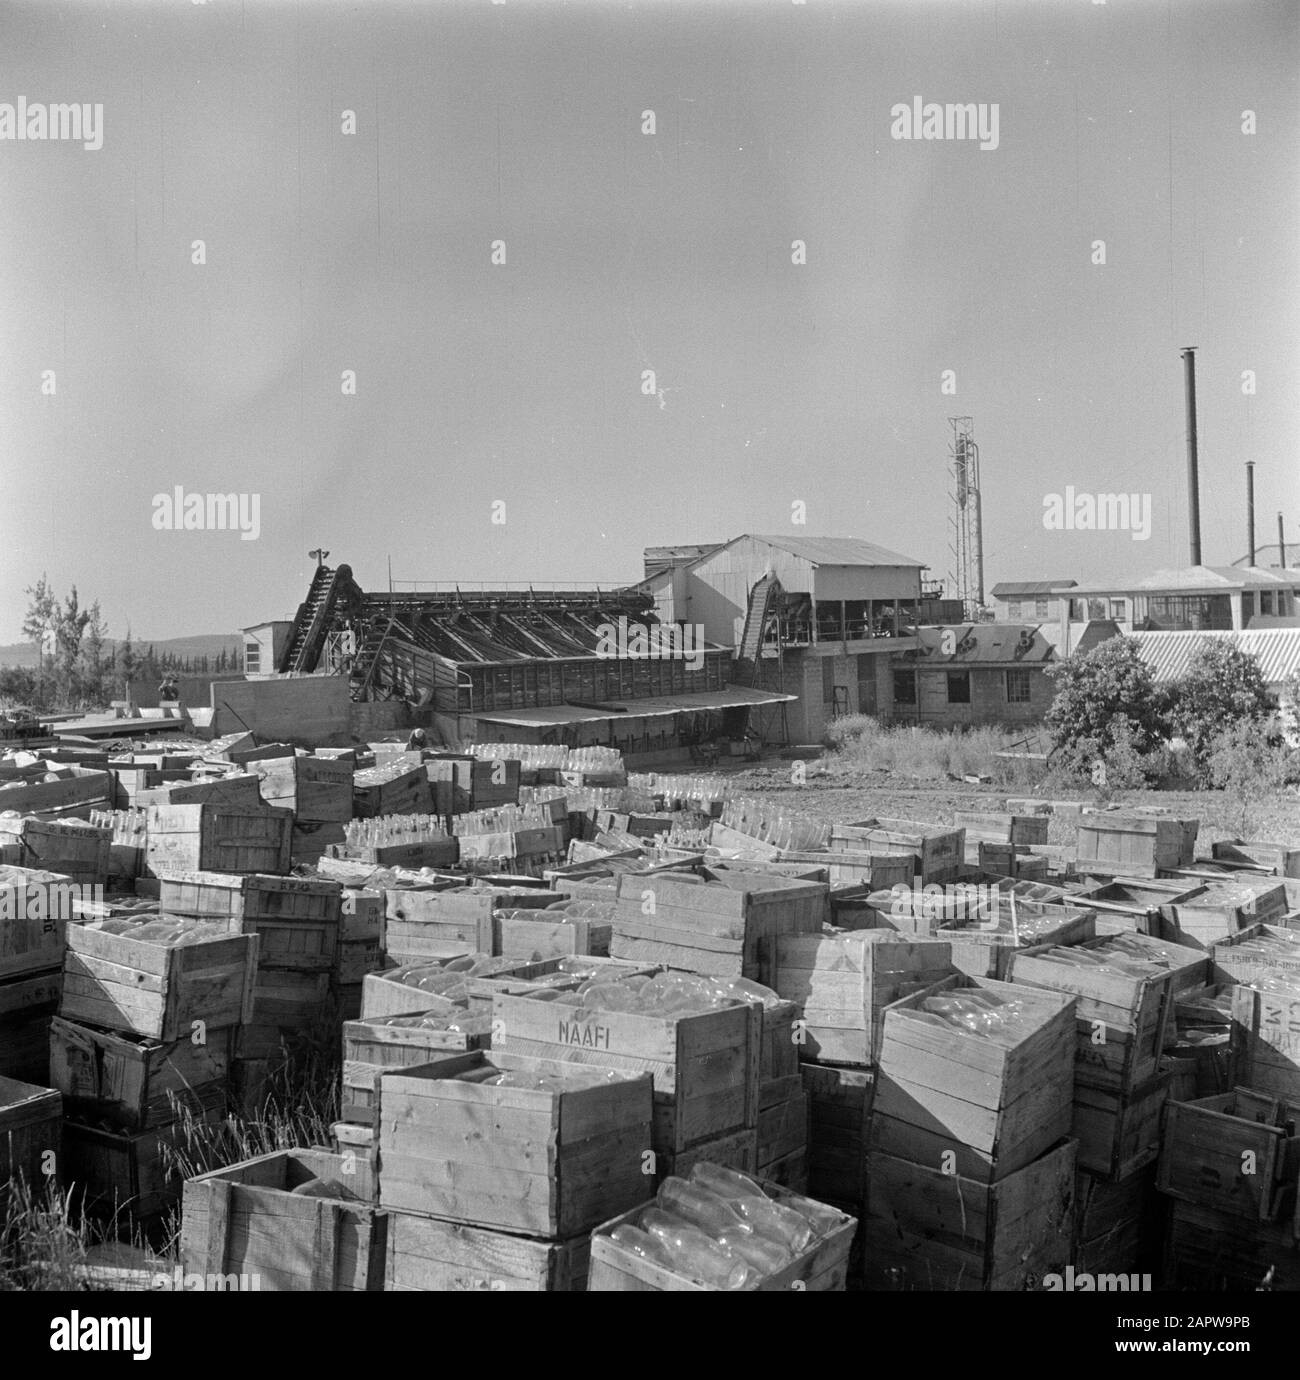 Israel 1948-1949: kibbutz Kiwath Brenner  Crates with empty bottles, presumably at the bottle rinsing of kibbutz Kiwath Brenner; in the foreground a crate with the inscription NAFI Annotation: Kibbutz Kiwath Brenner is also referred to as Givat Brenner. NAAFI (Navy, Army and Air Force Institutes) is a 1921 British organization for military catering Date: 1948 Location: Israel, Rehovot Keywords: bottles, buildings, kibbutz, warehouses, cleaning equipment Stock Photo